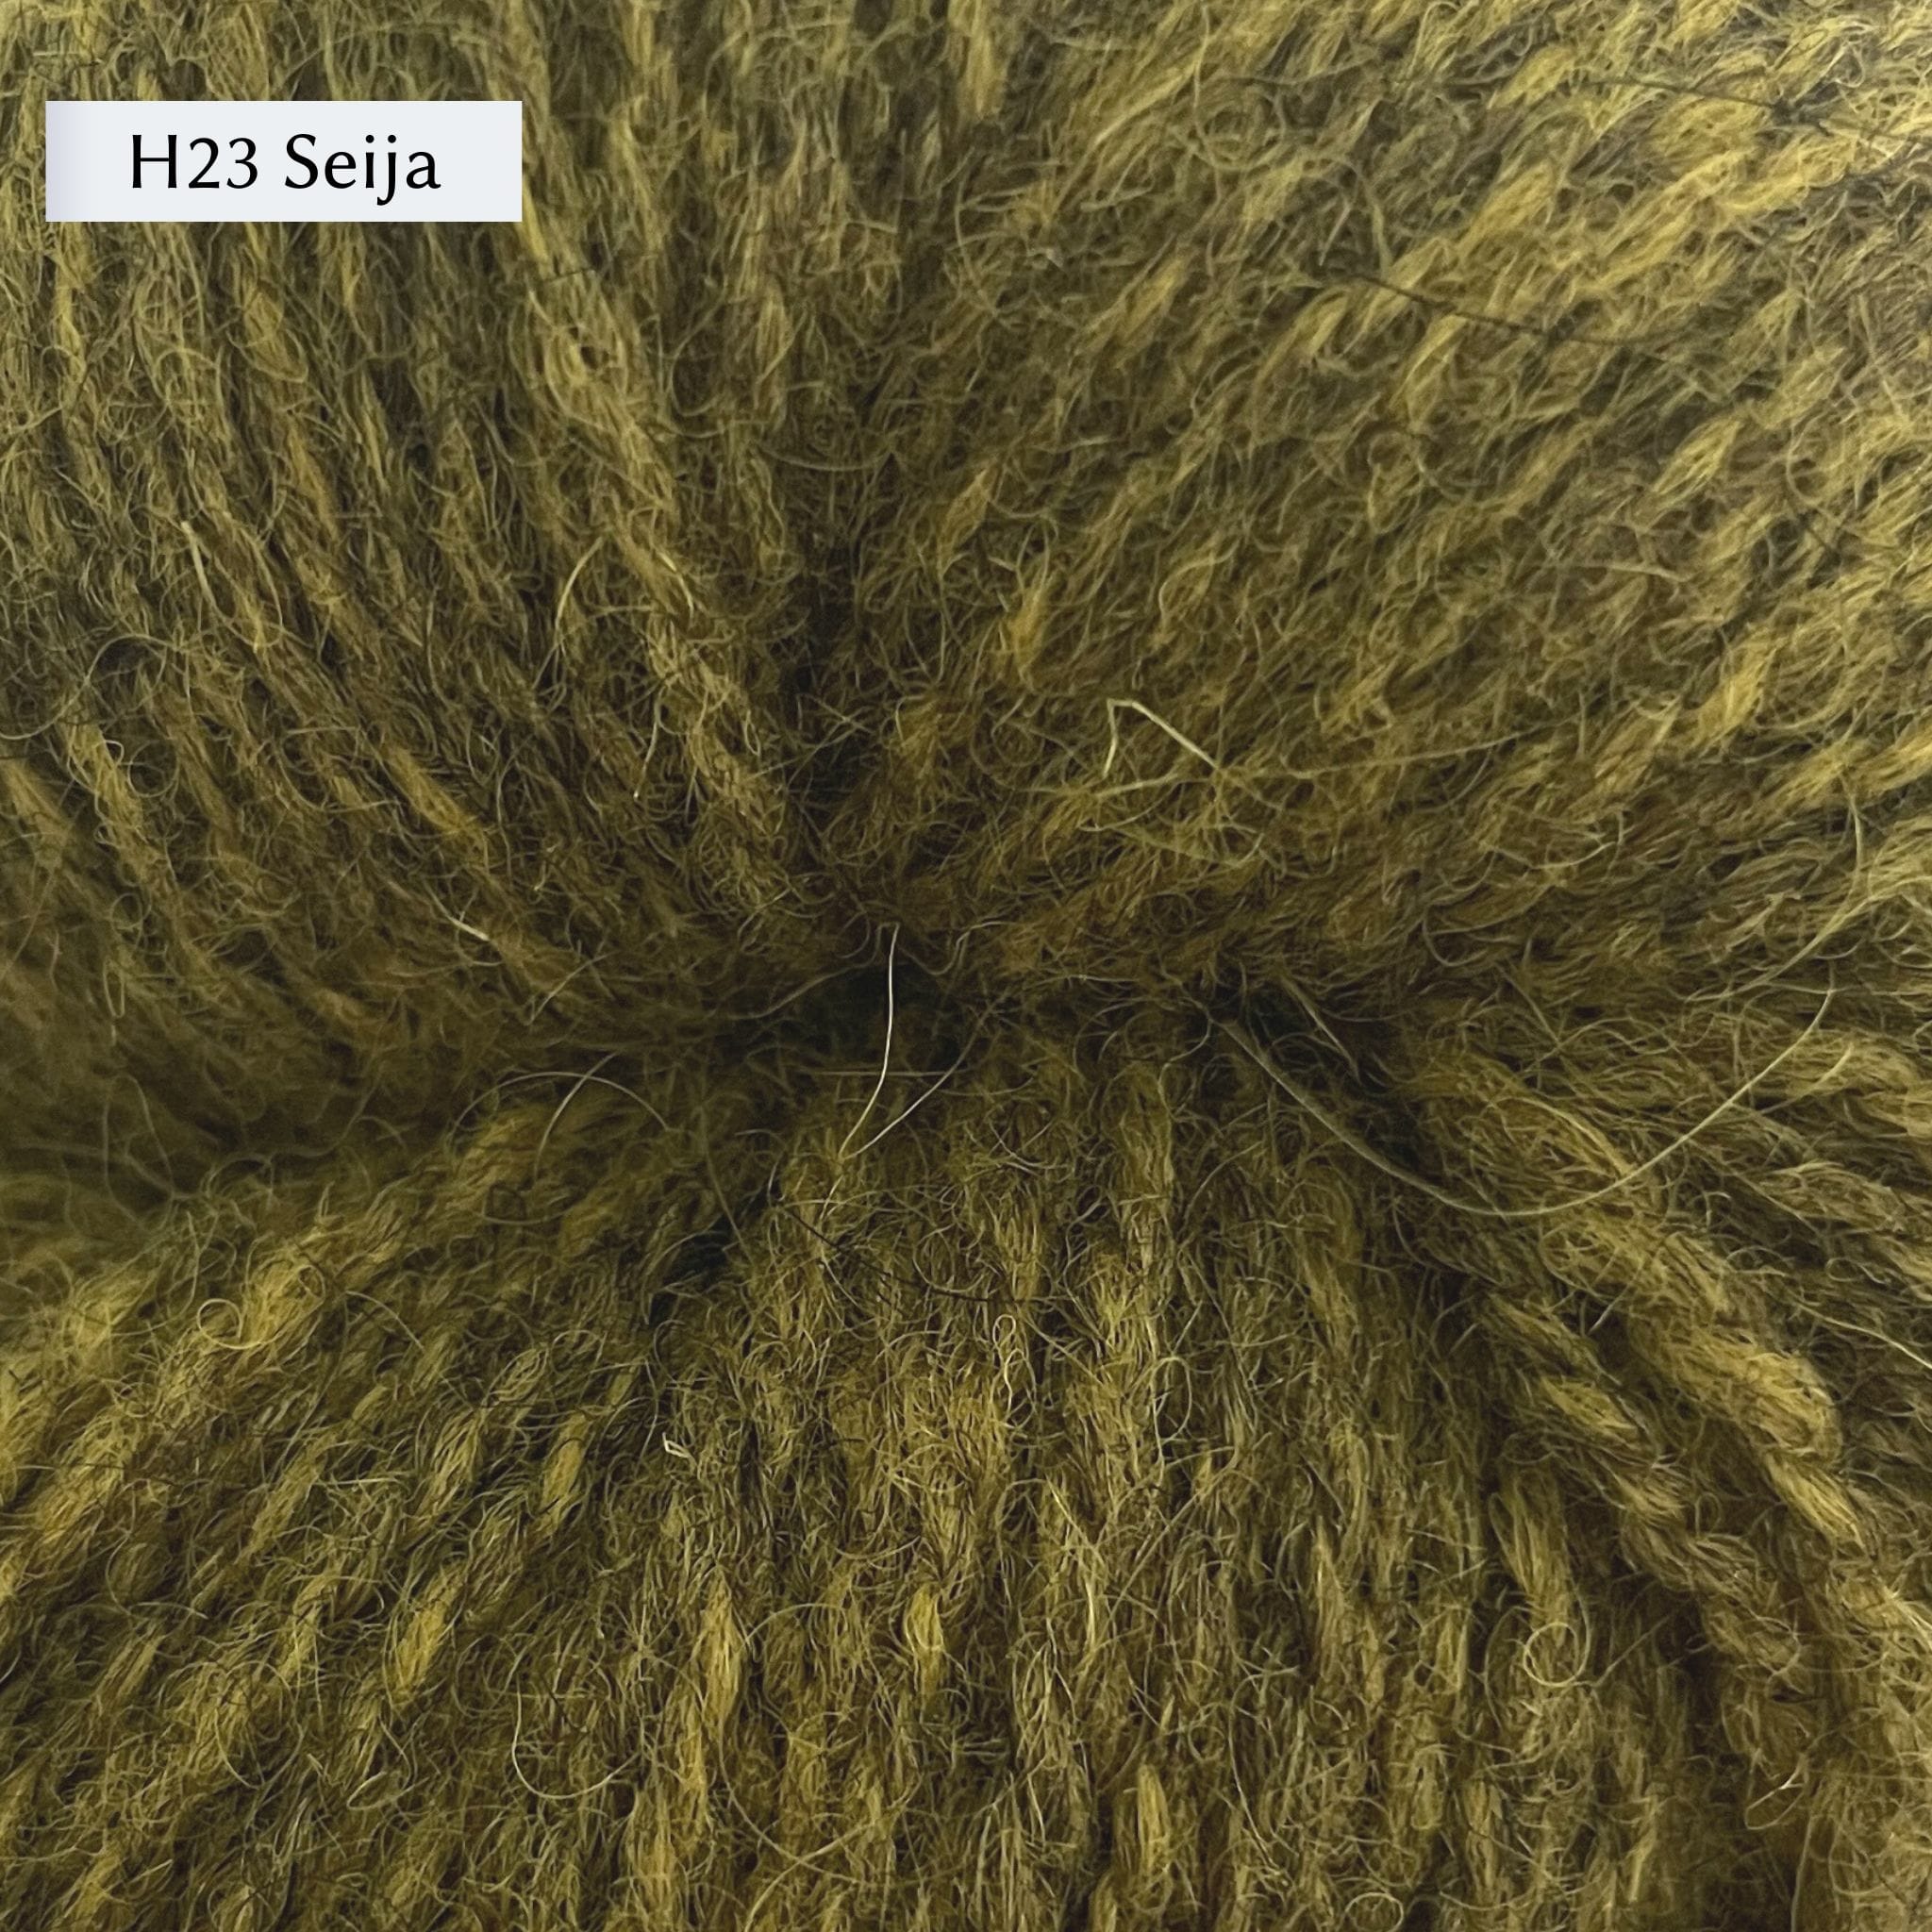 Tukuwool DK Yarn, 100% Finnish Wool shown in colorway H23 Seija which is a heathered green color.